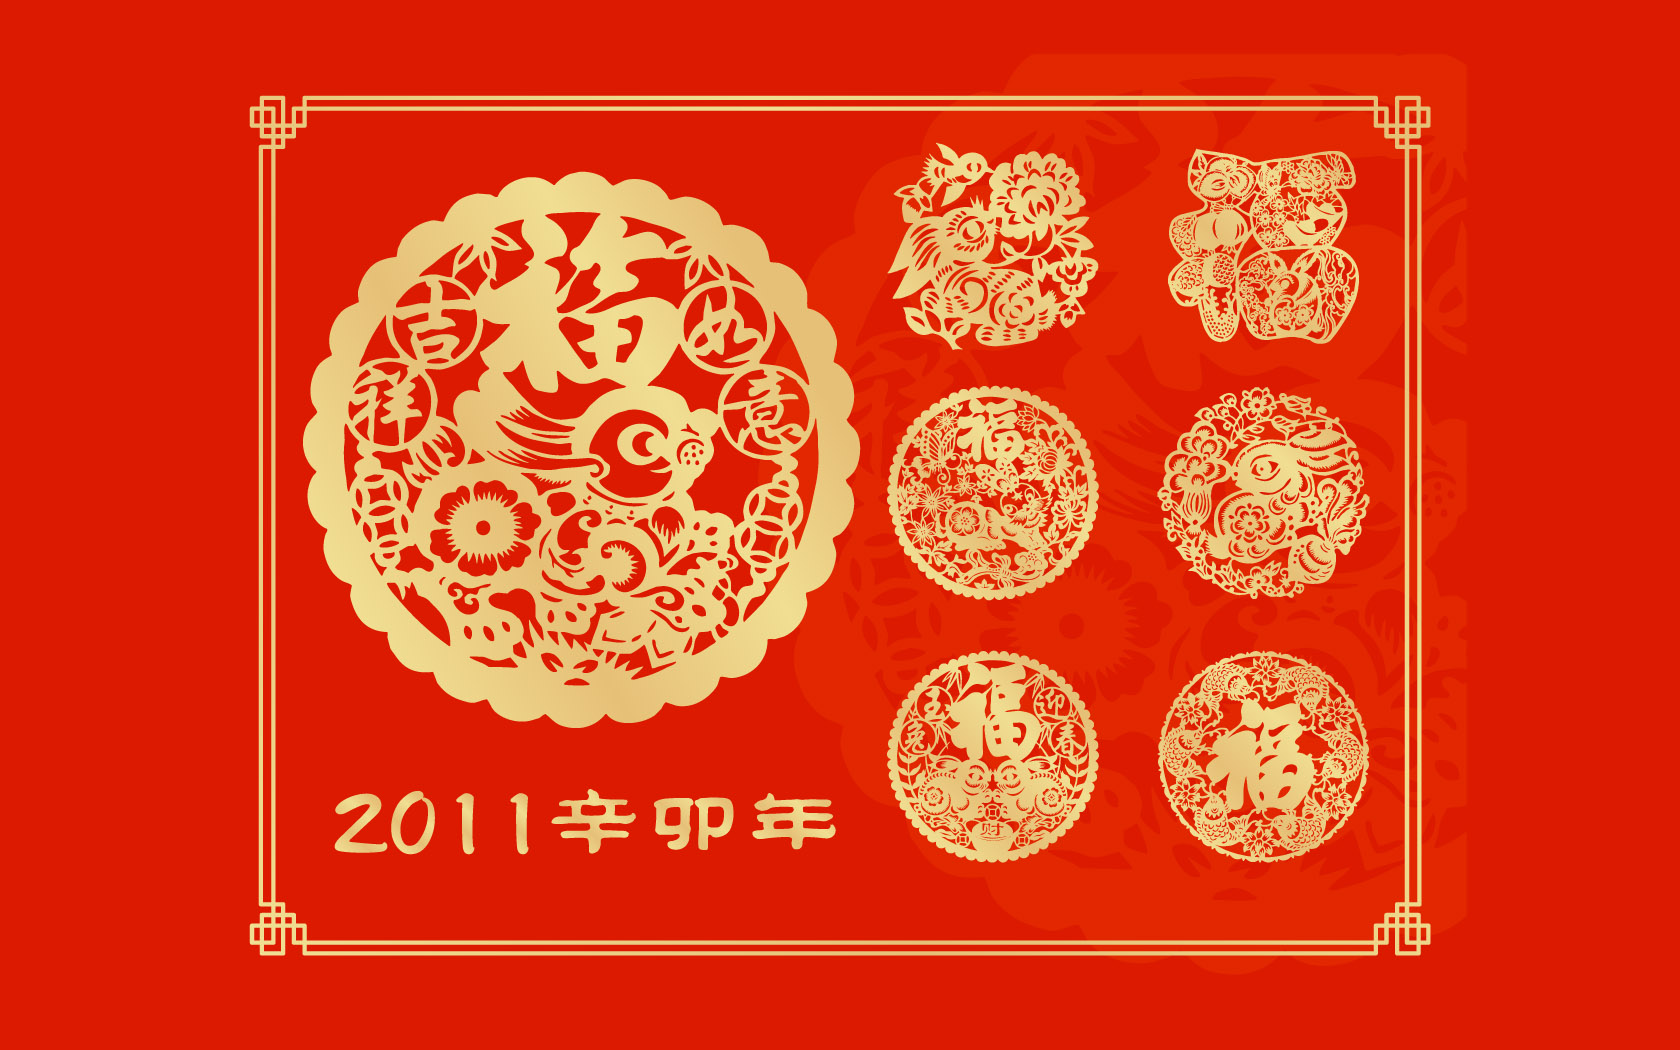 Xinmao traditional Chinese New Year wallpaper